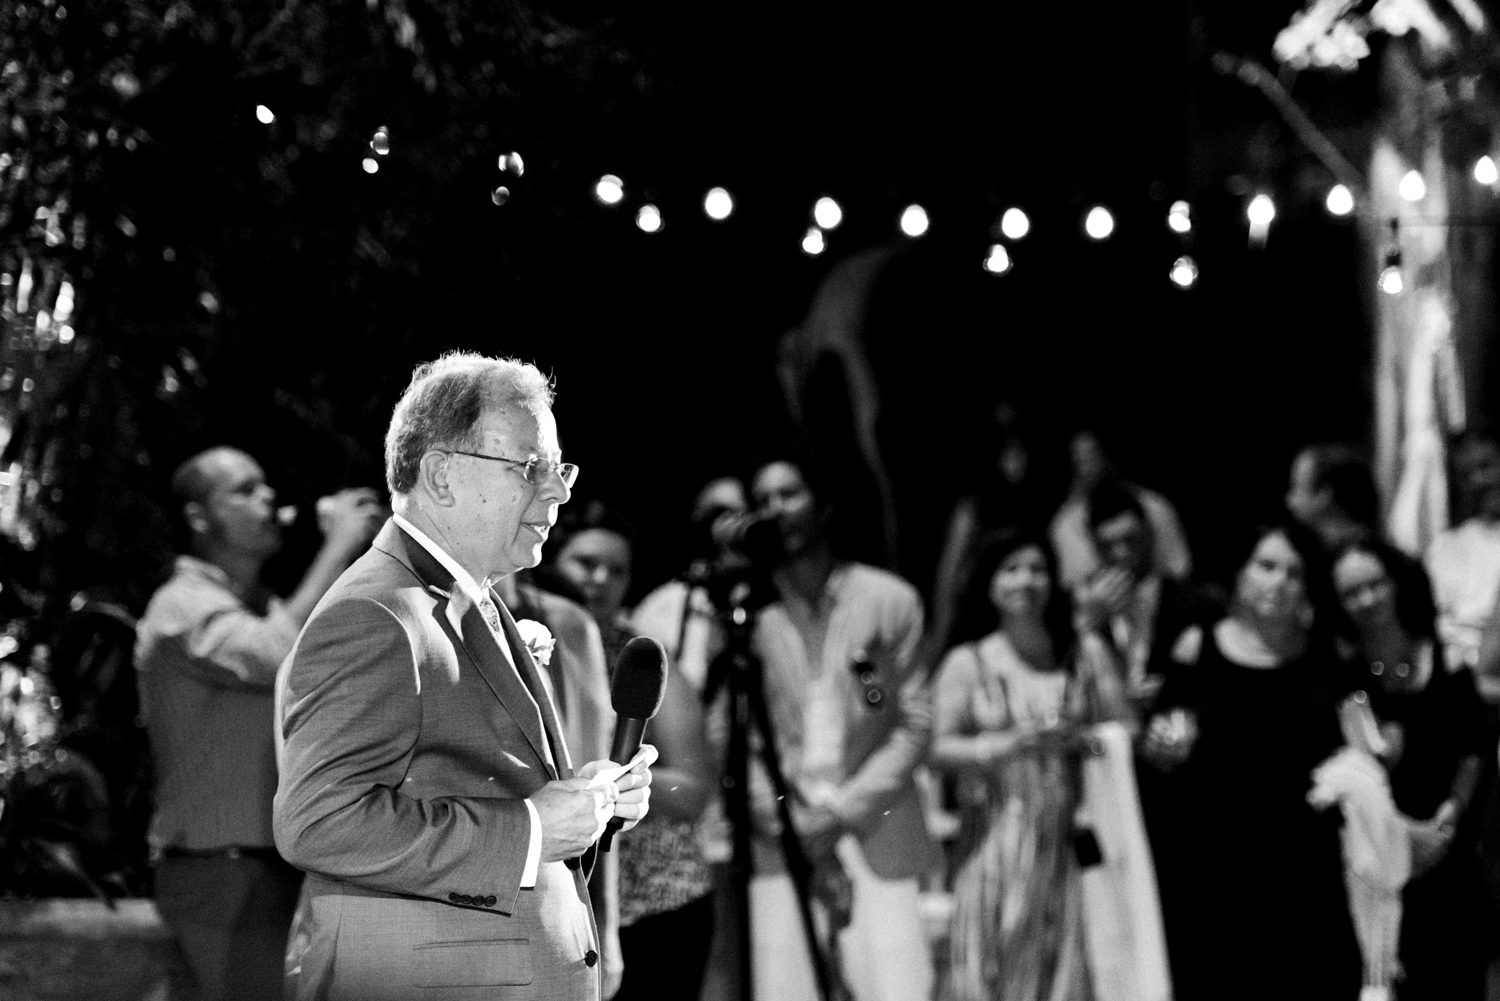 A black and white photo of a man giving a speech at a Key West Garden Club wedding.